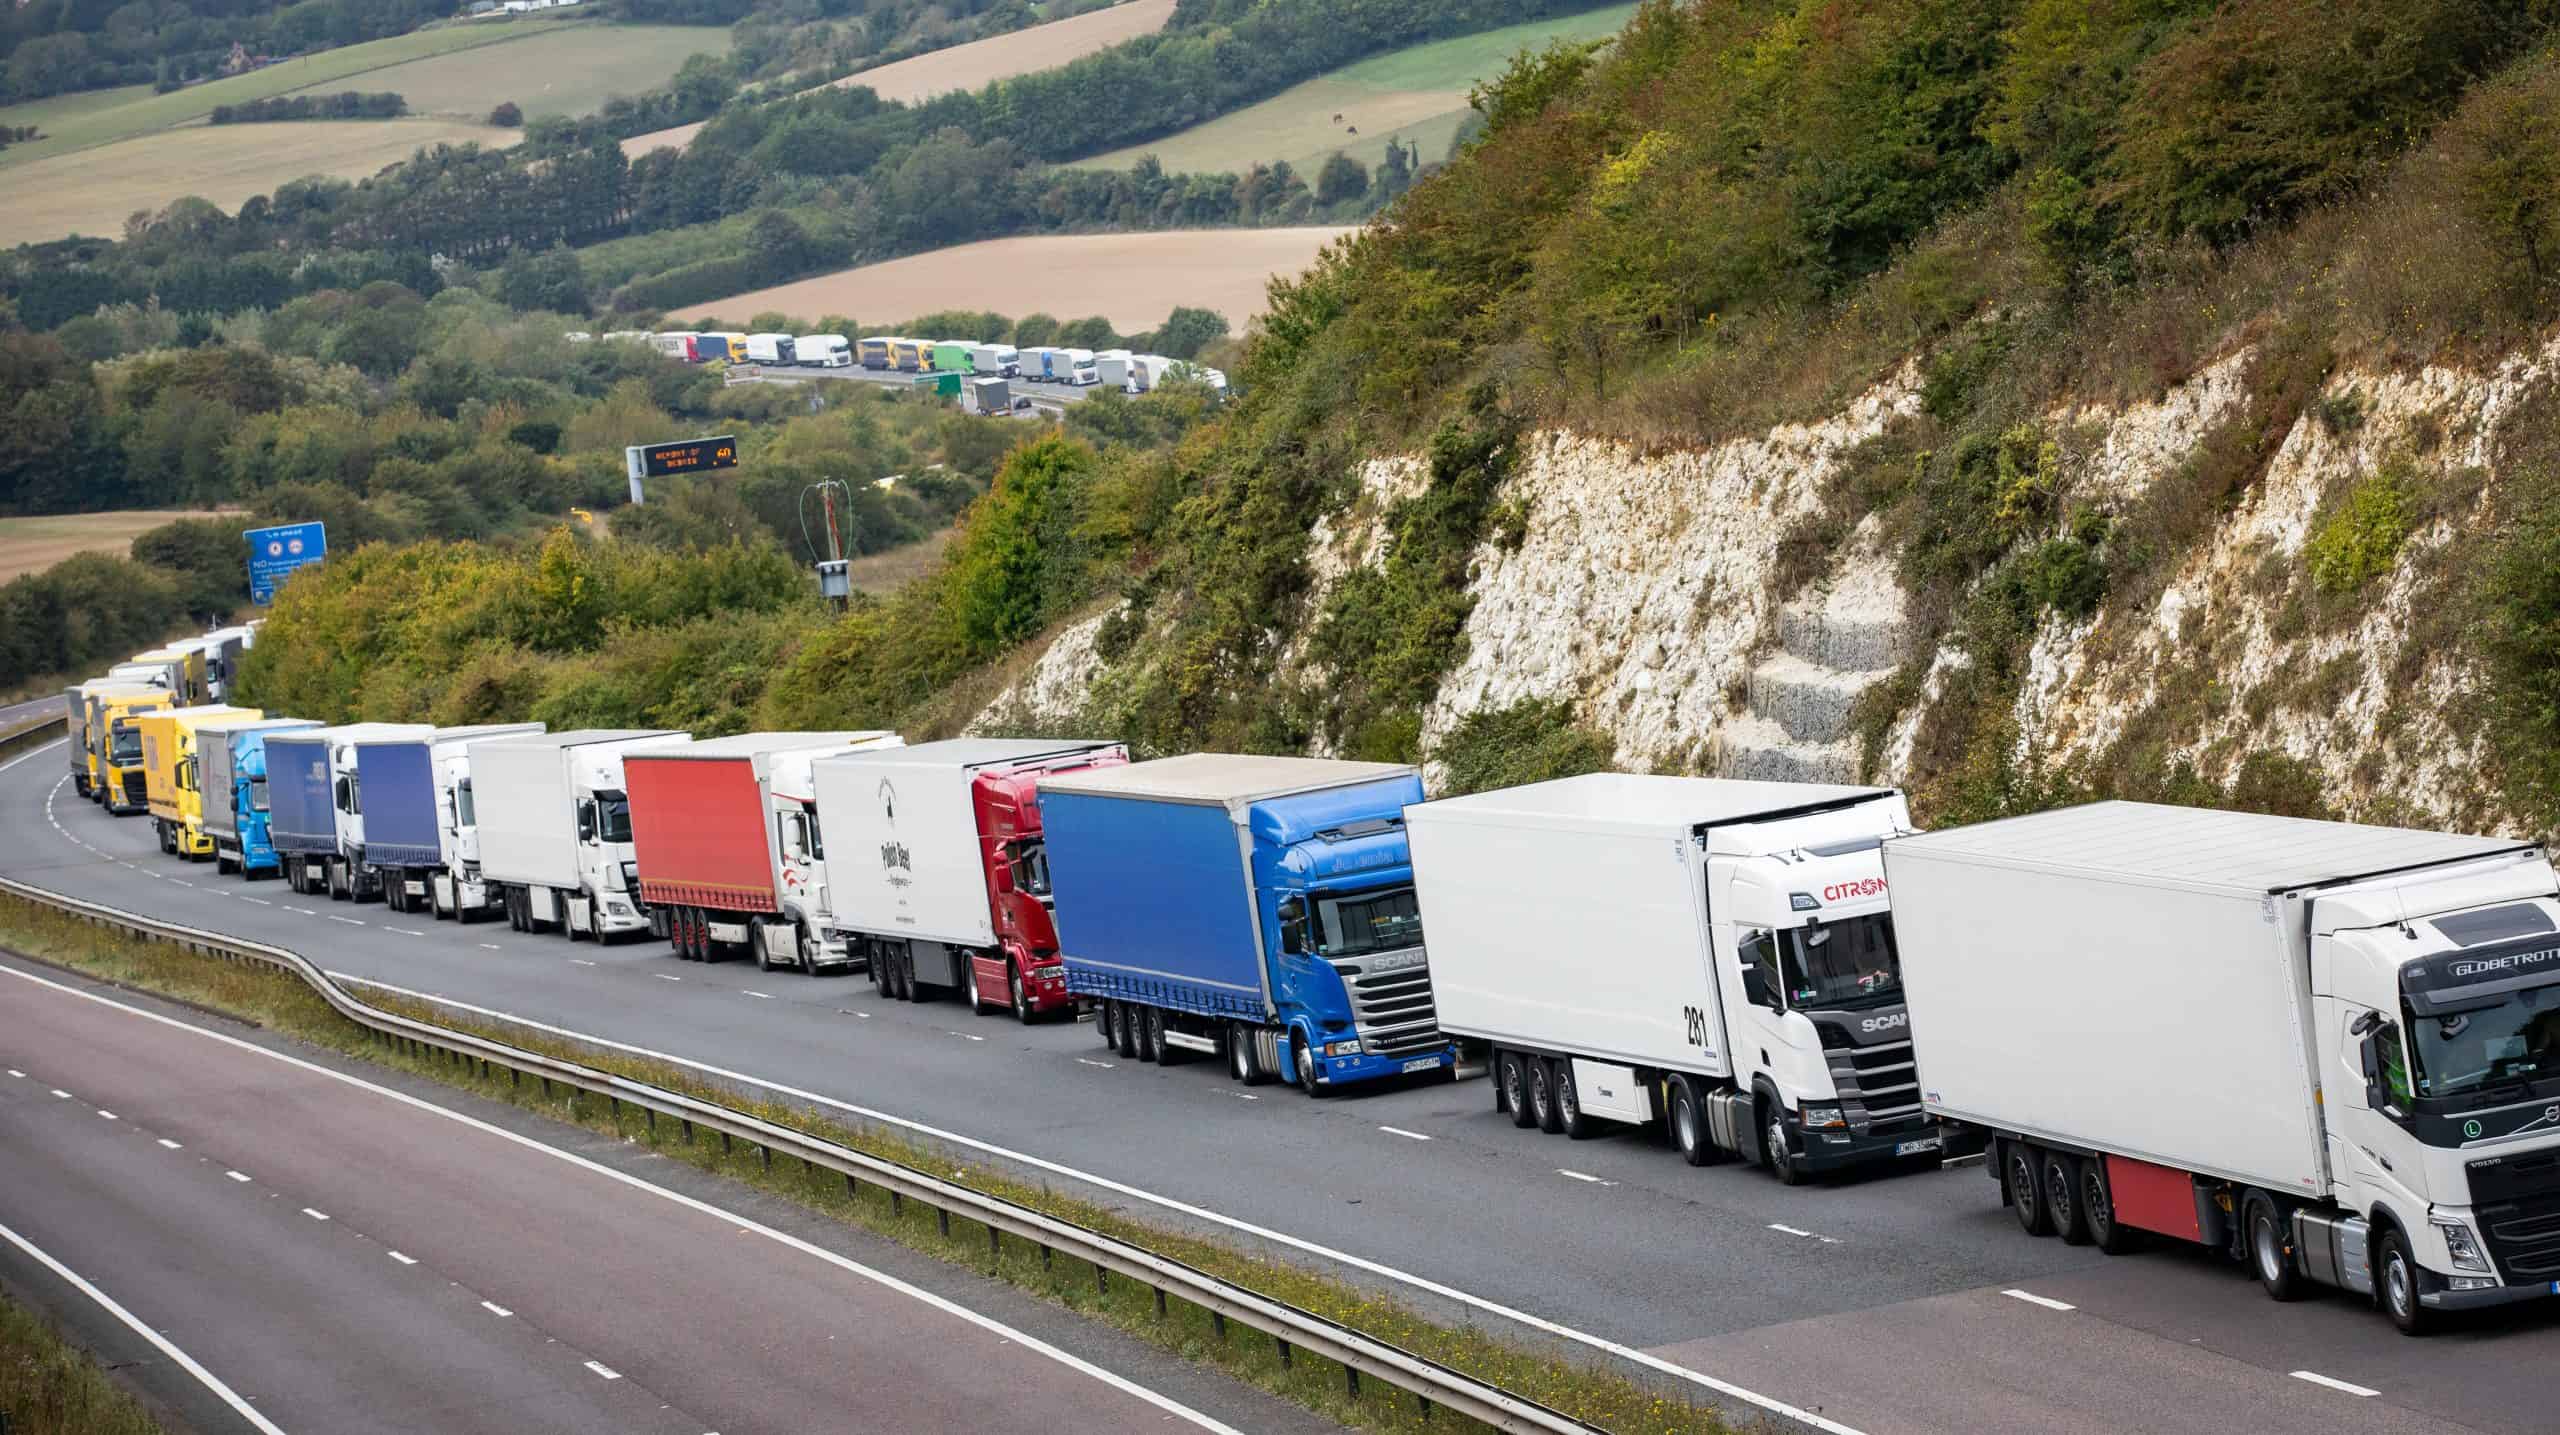 A glimpse of what’s to come as Calais strike activates Operation Stack